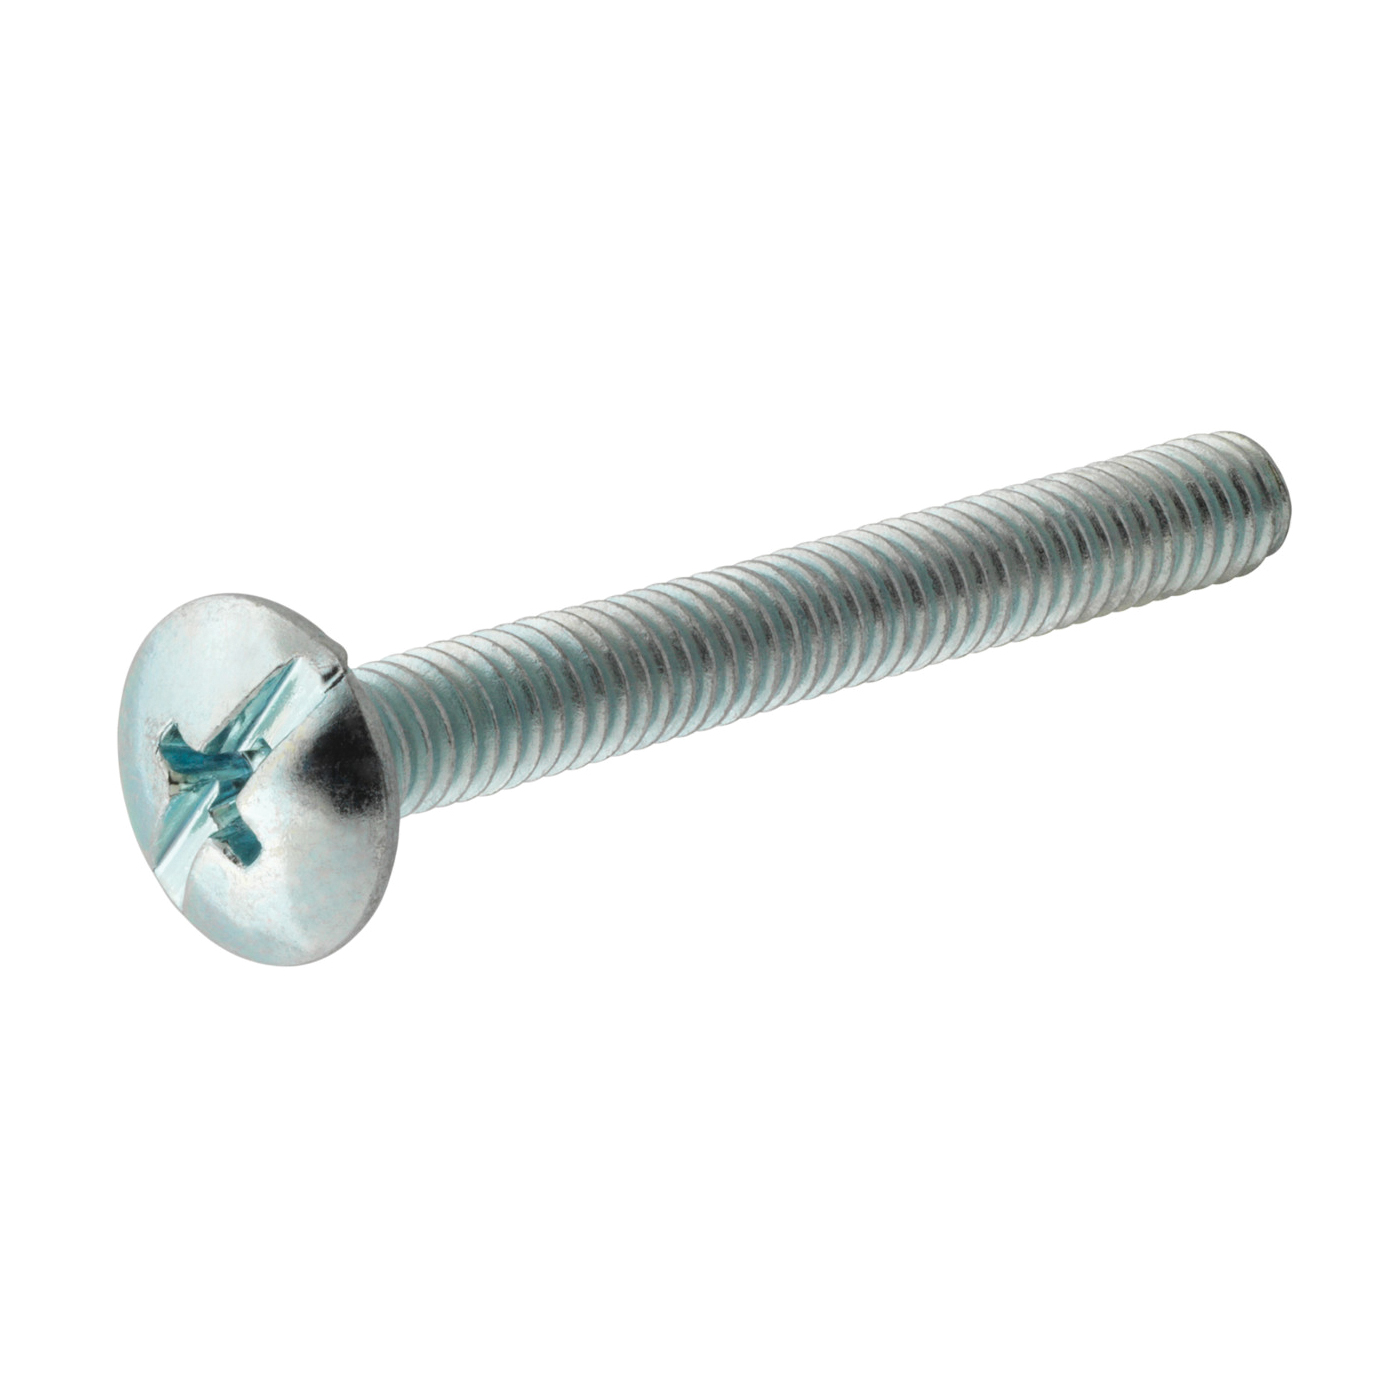 881042 Machine Screw, #8-32 Thread, 1/2 in L, Truss Head, Phillips, Slotted Drive, Stainless Steel